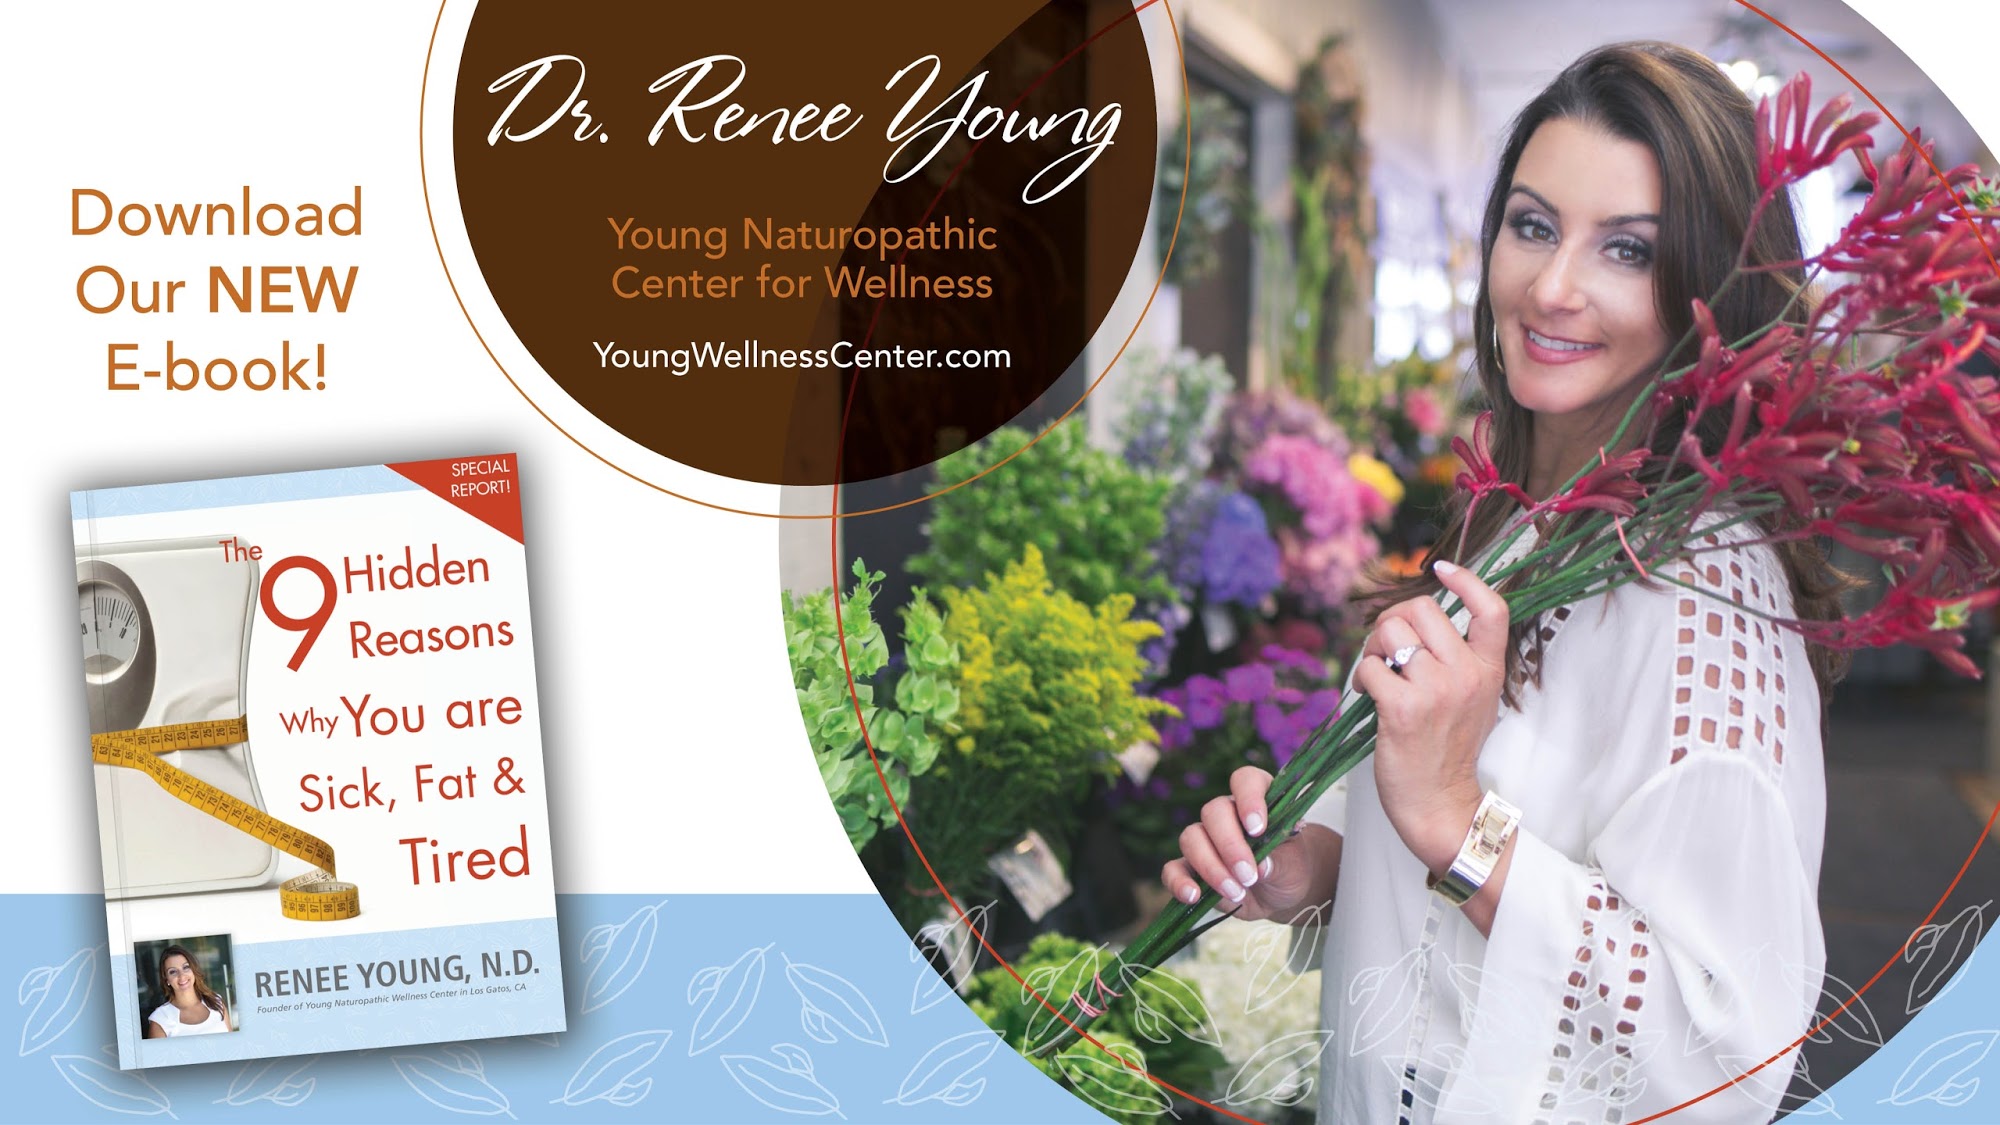 Young Naturopathic Center for Wellness